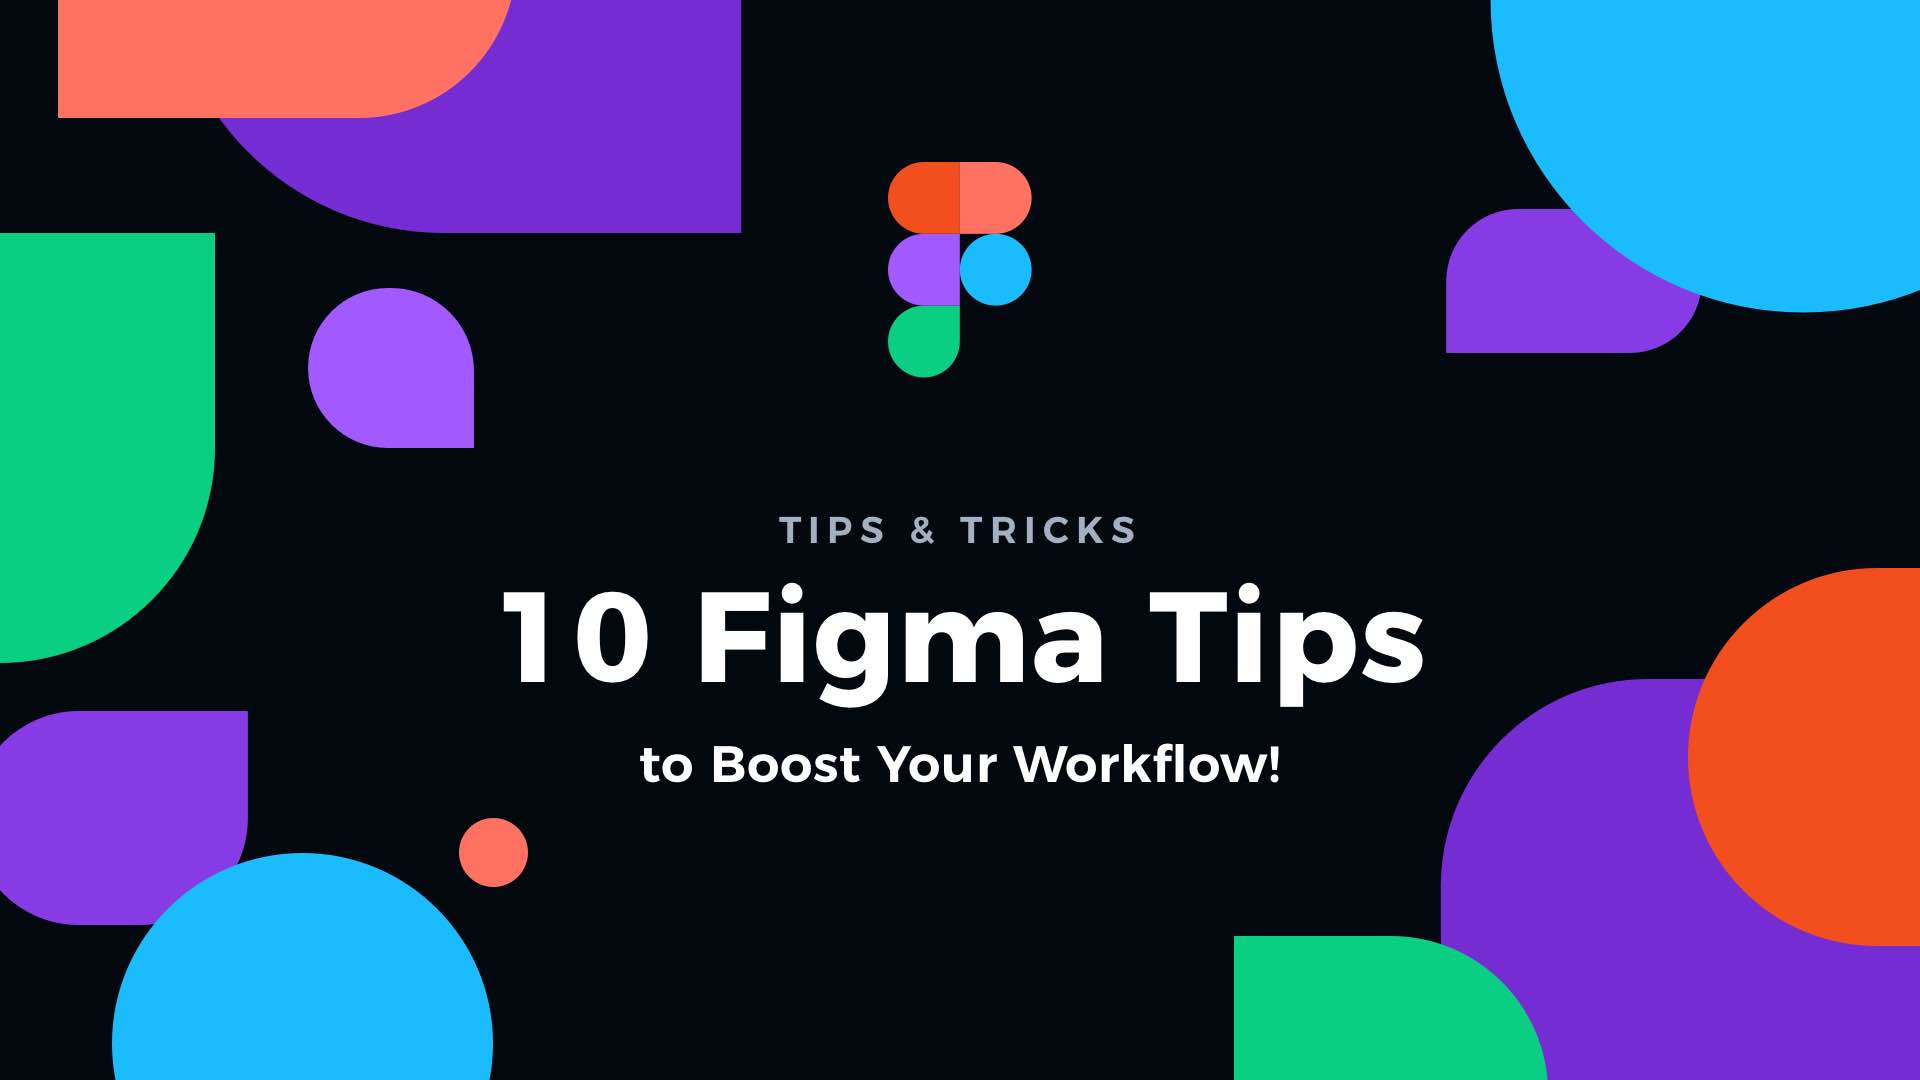 10 Figma Tips & Tricks to Boost Your Workflow